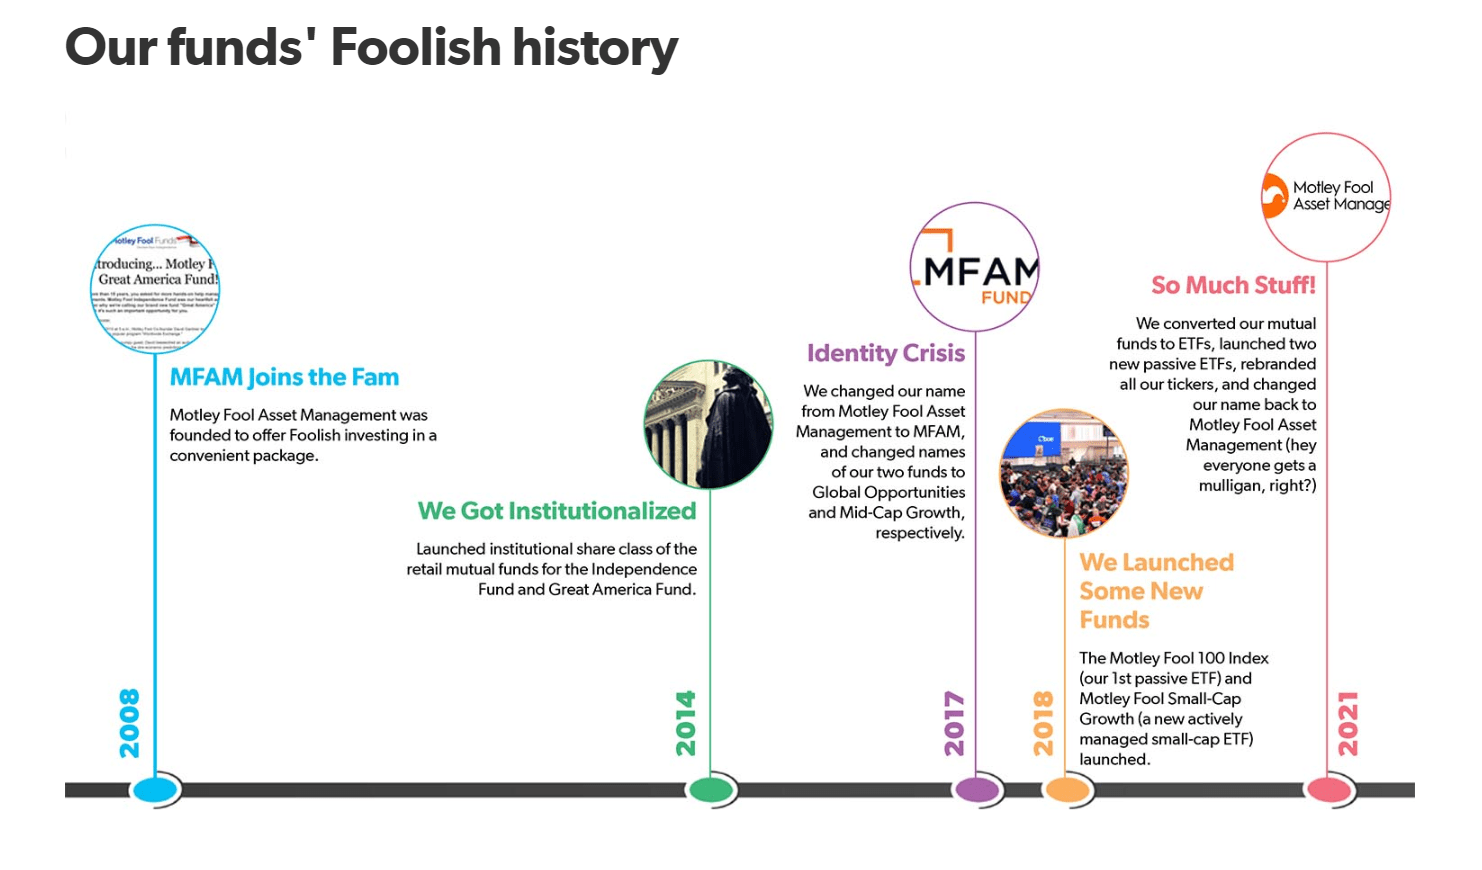 The Motley Fool's timeline